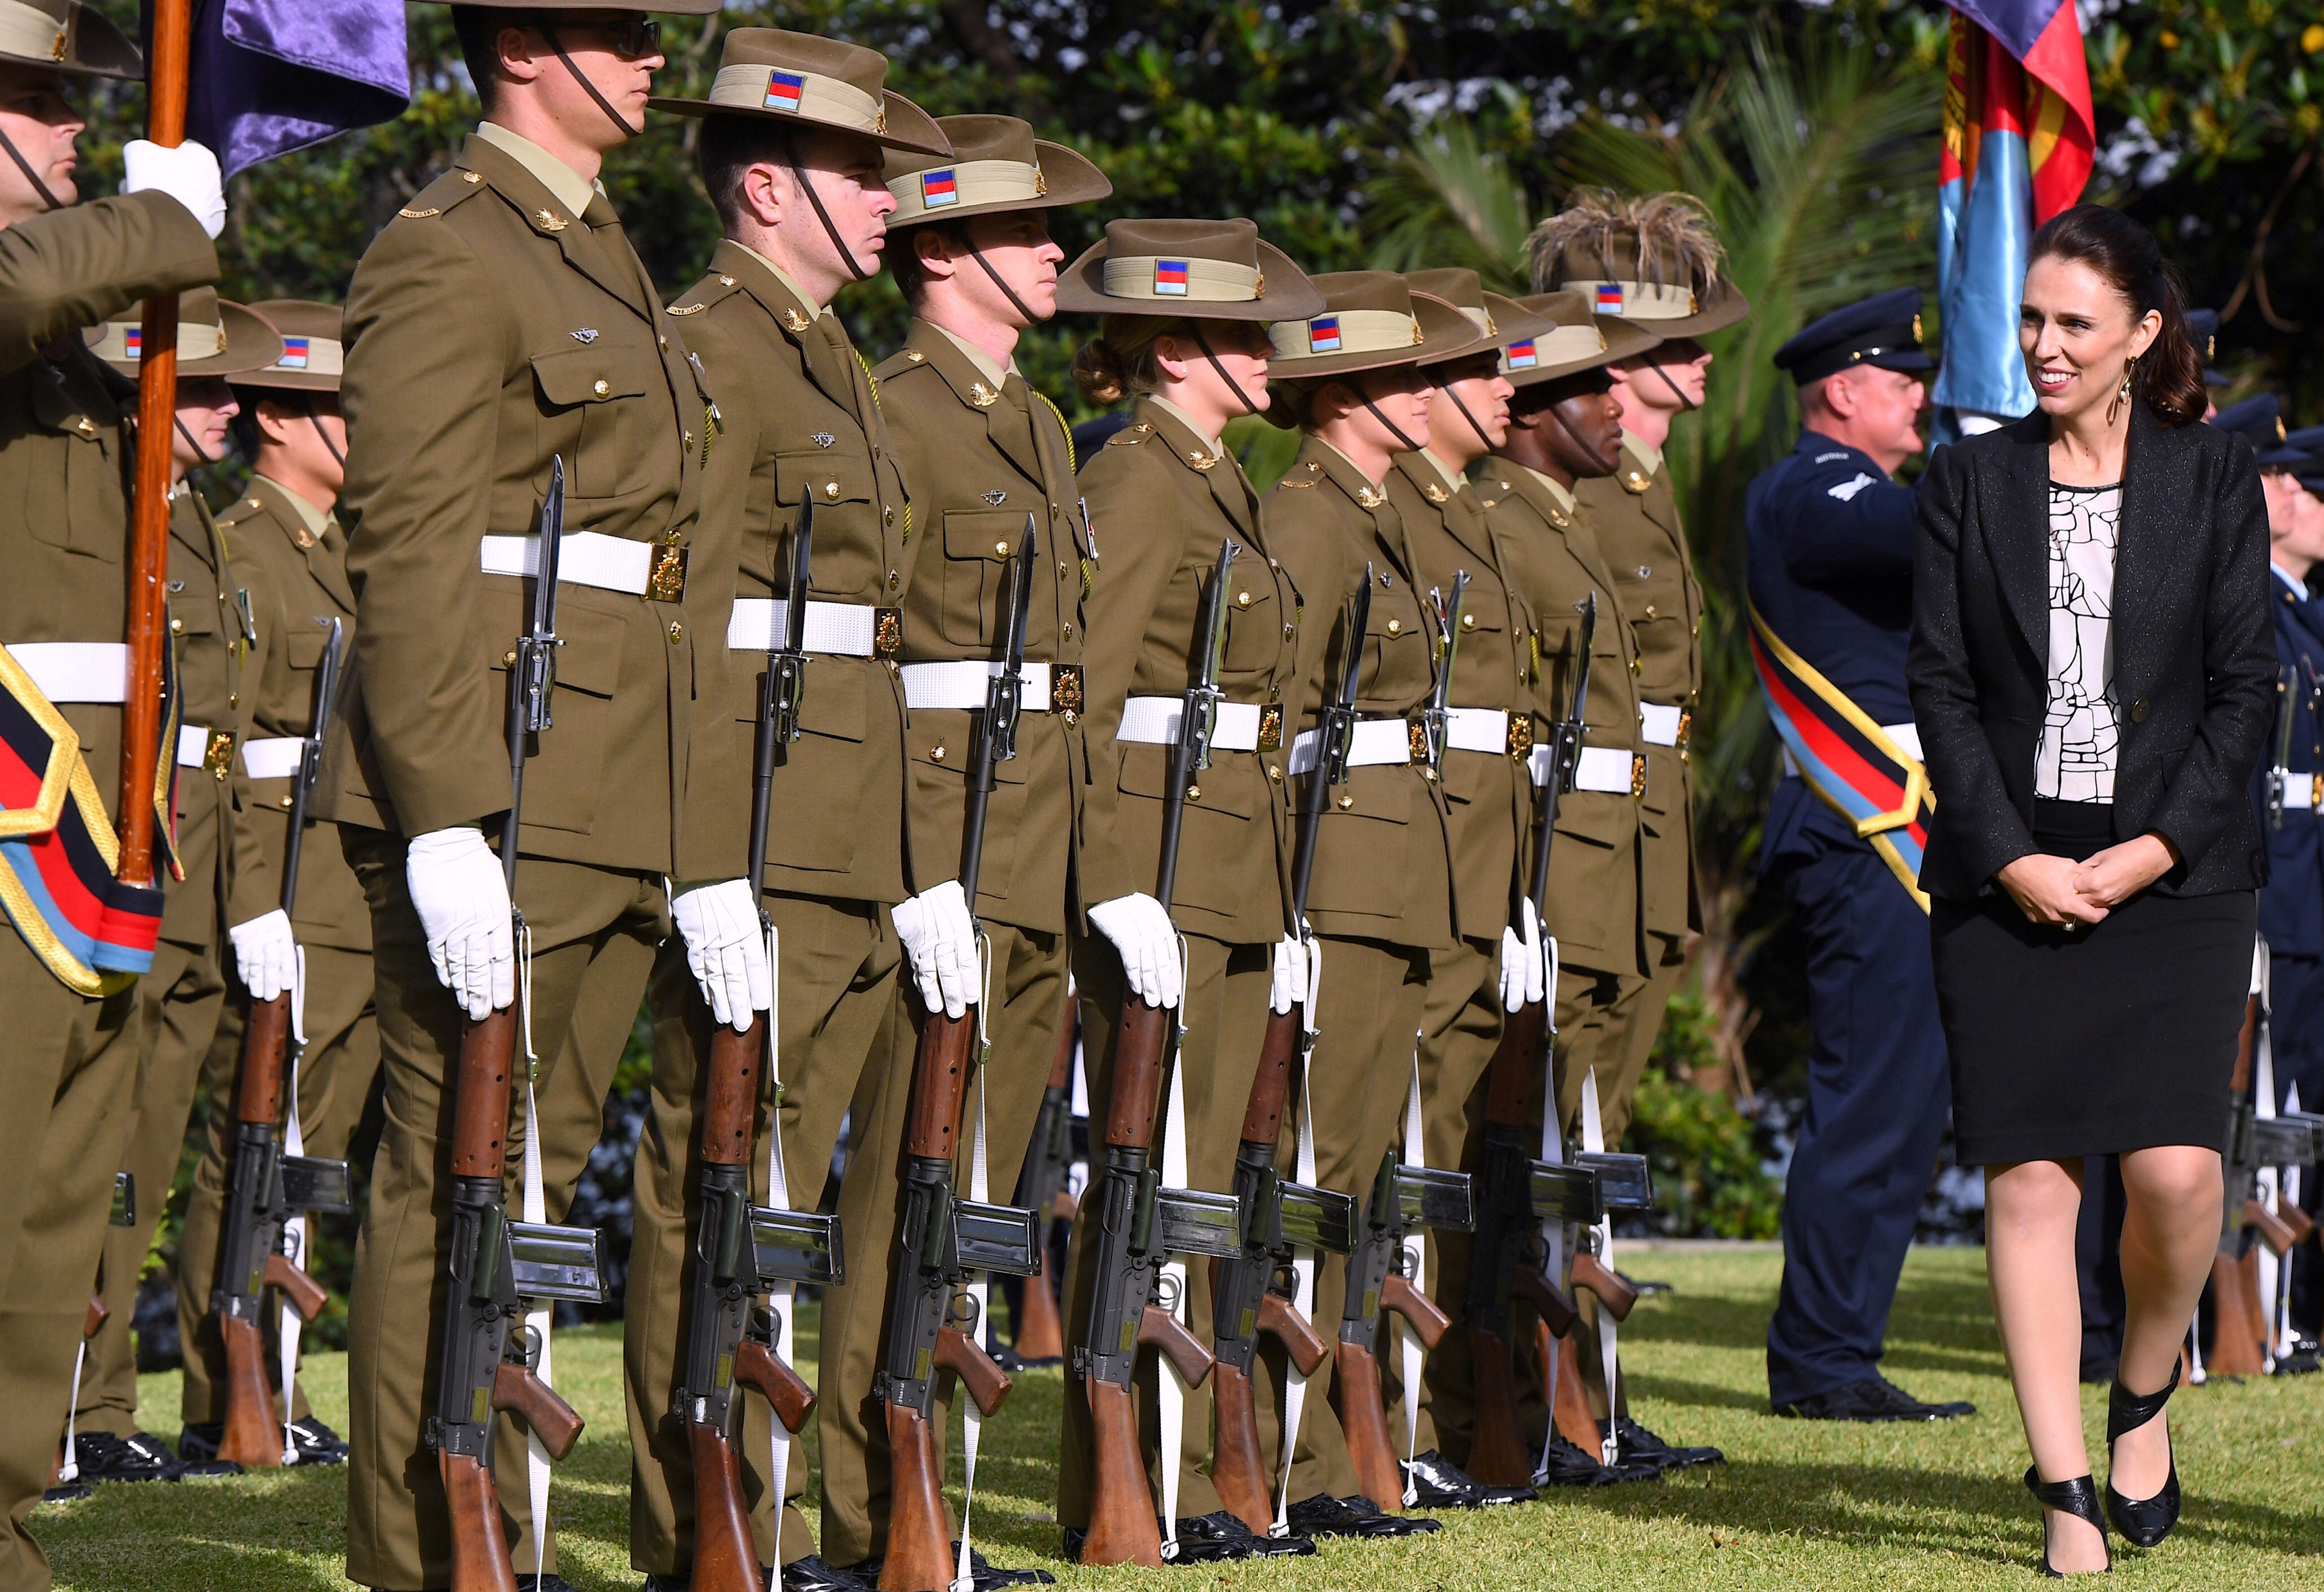 New Zealand Prime Minister Jacinda Ardern inspects soldiers during an official welcoming ceremony at Admiralty House in Sydney